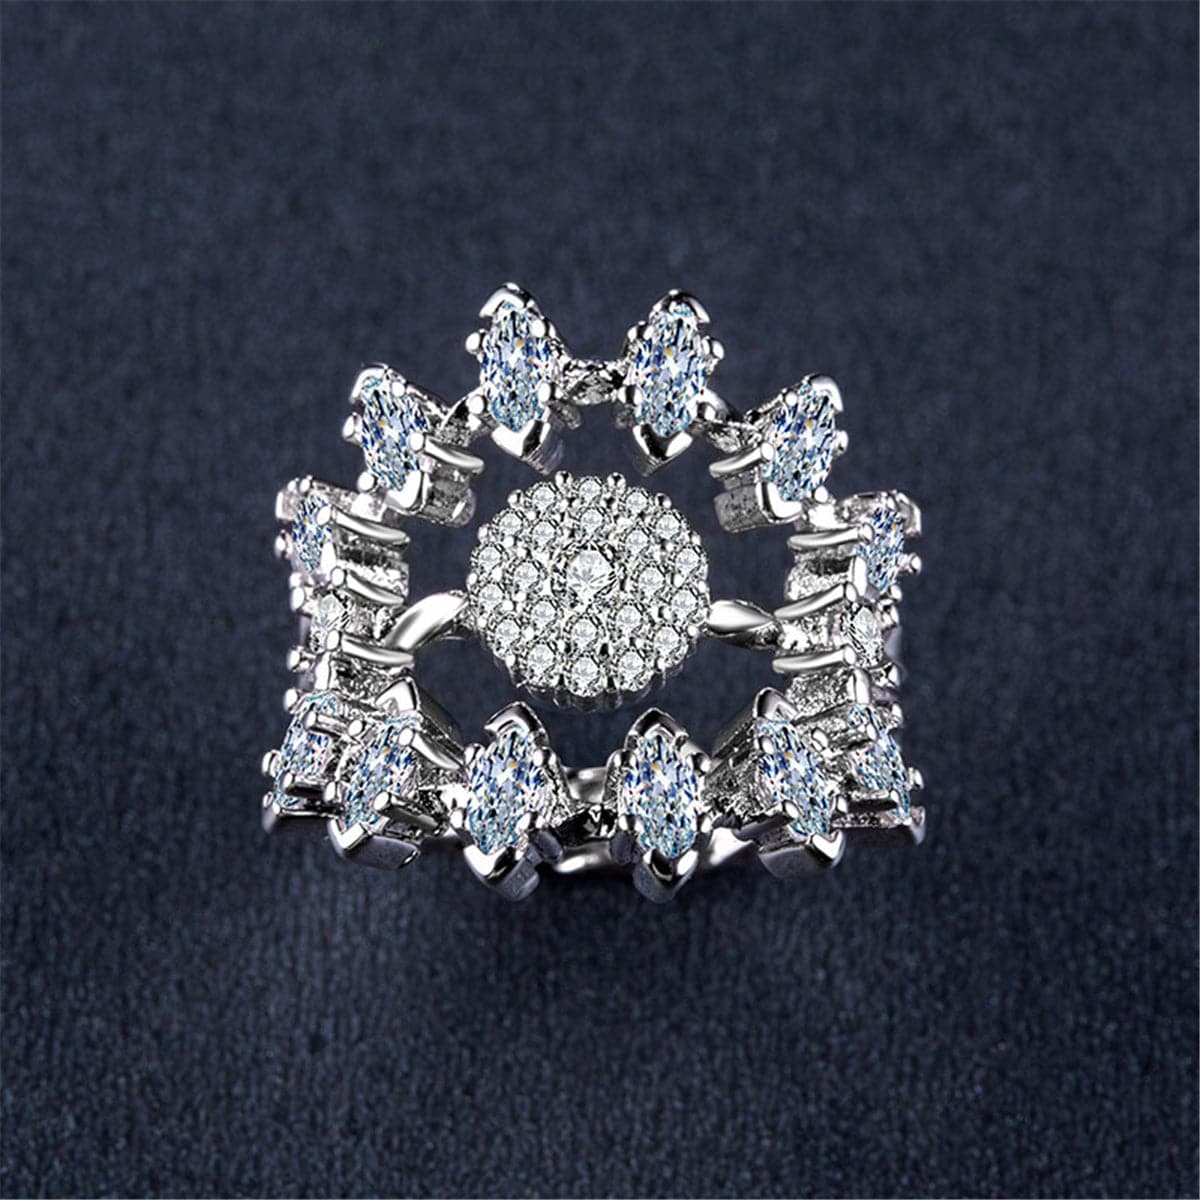 Crystal & Silver-Plated Firework Ring - streetregion